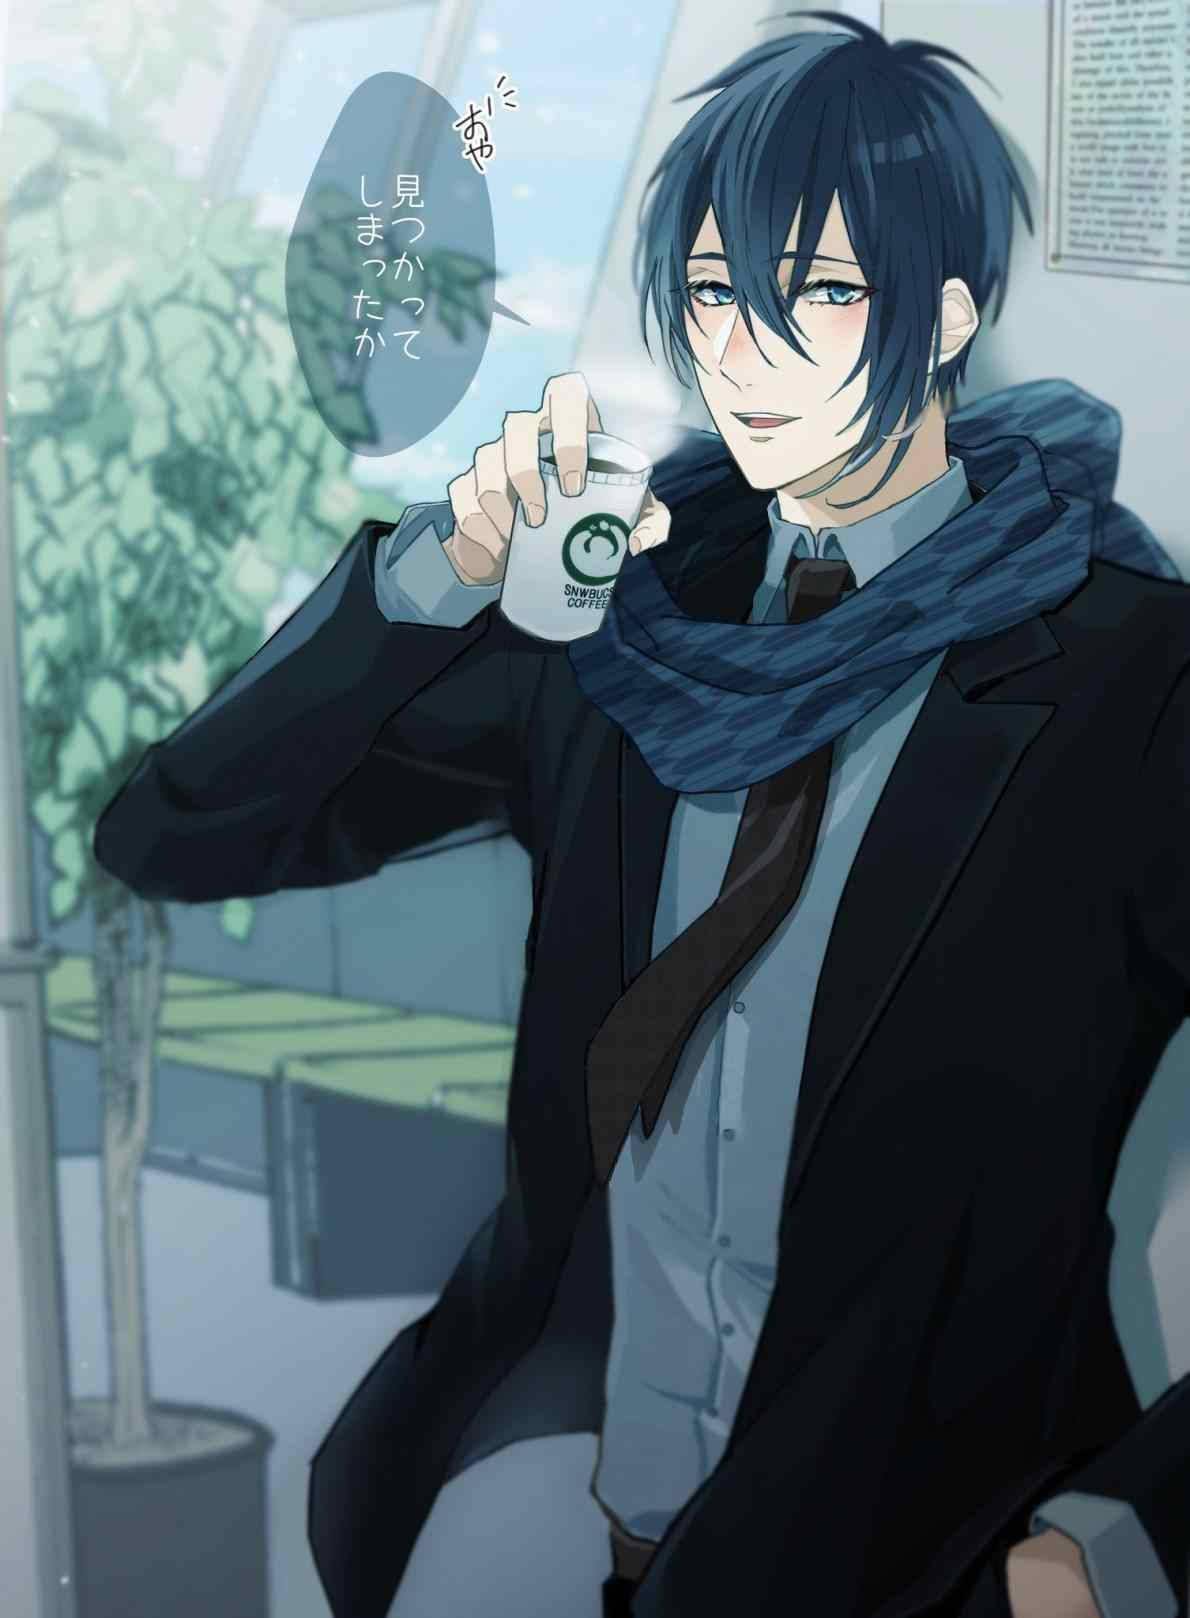 Enjoying A Cup Of Coffee, This Handsome Anime Boy Is Content. Wallpaper